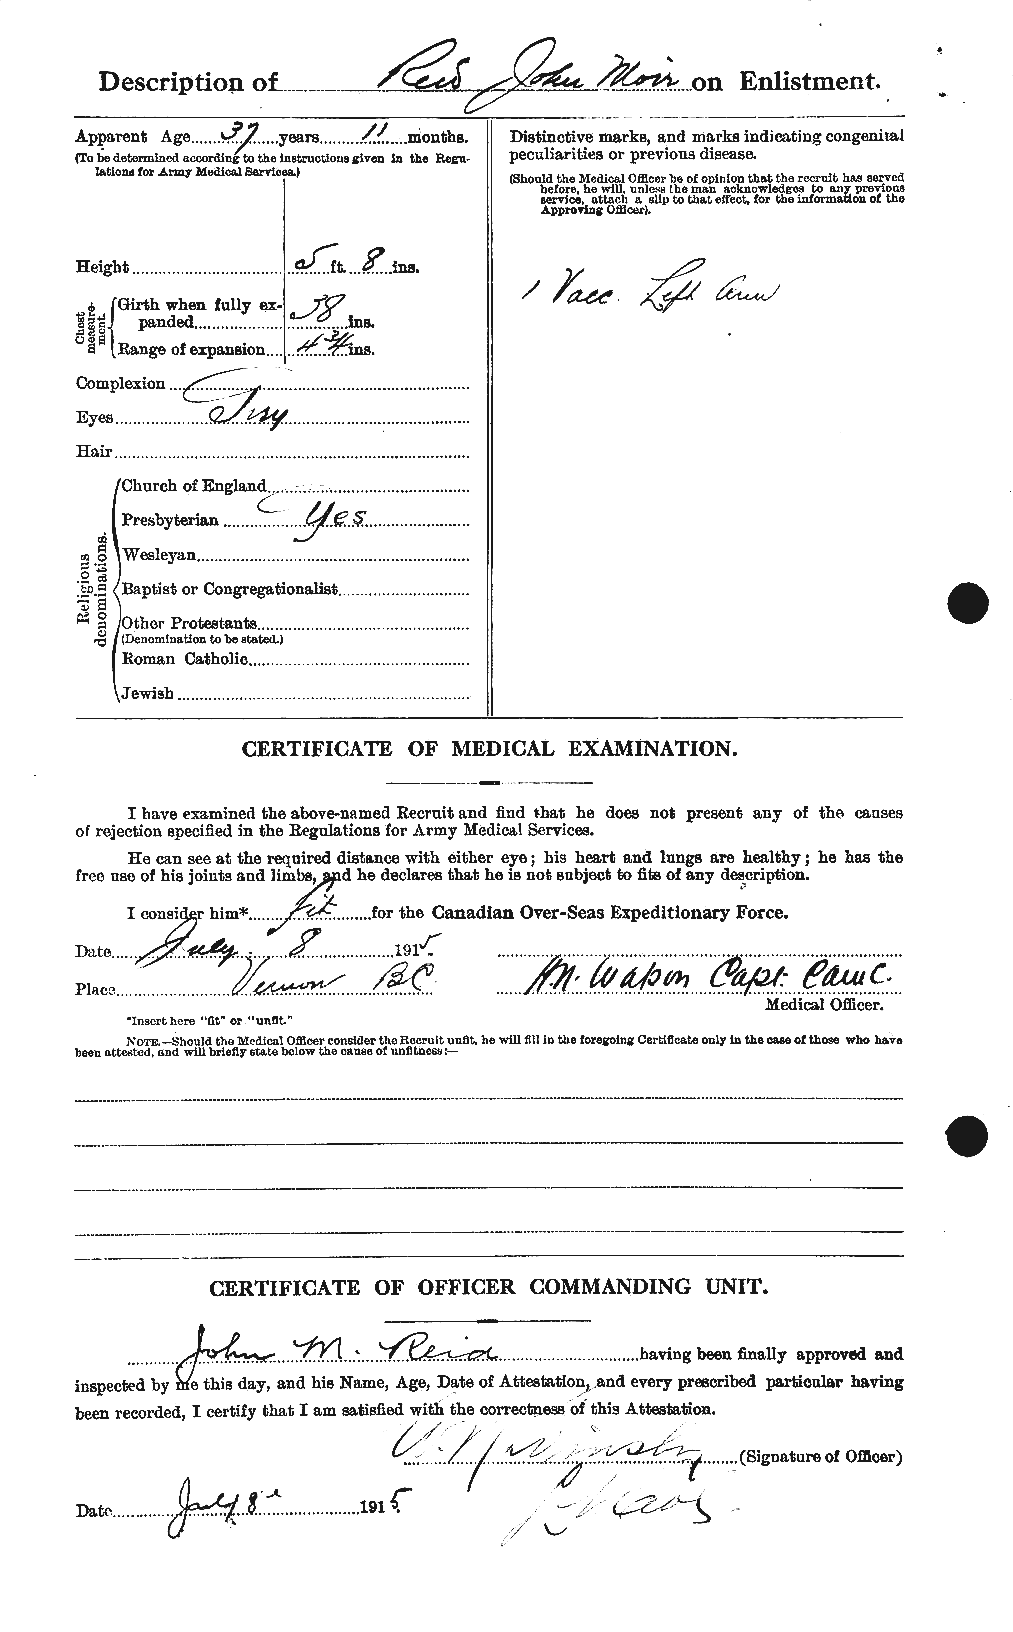 Personnel Records of the First World War - CEF 598858b